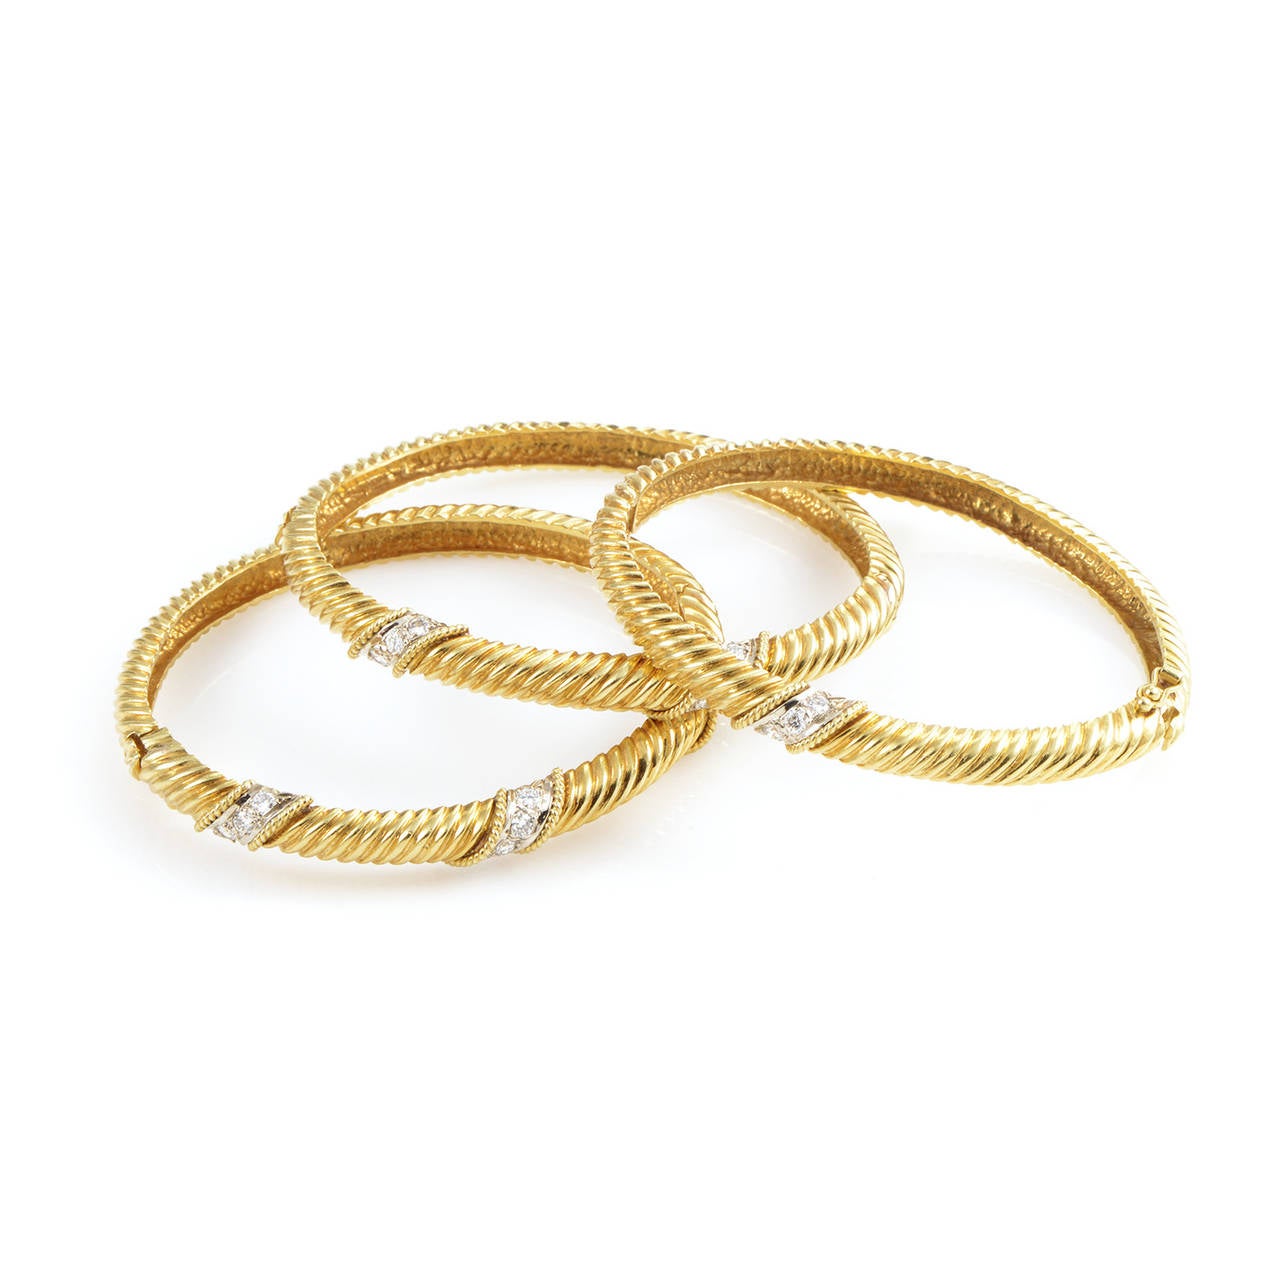 A twinkling set of bangles is one of the most stylish accessories out there. This set of bangles is made from pure 18K yellow gold and are set with 1.90 carats of shimmering diamonds.